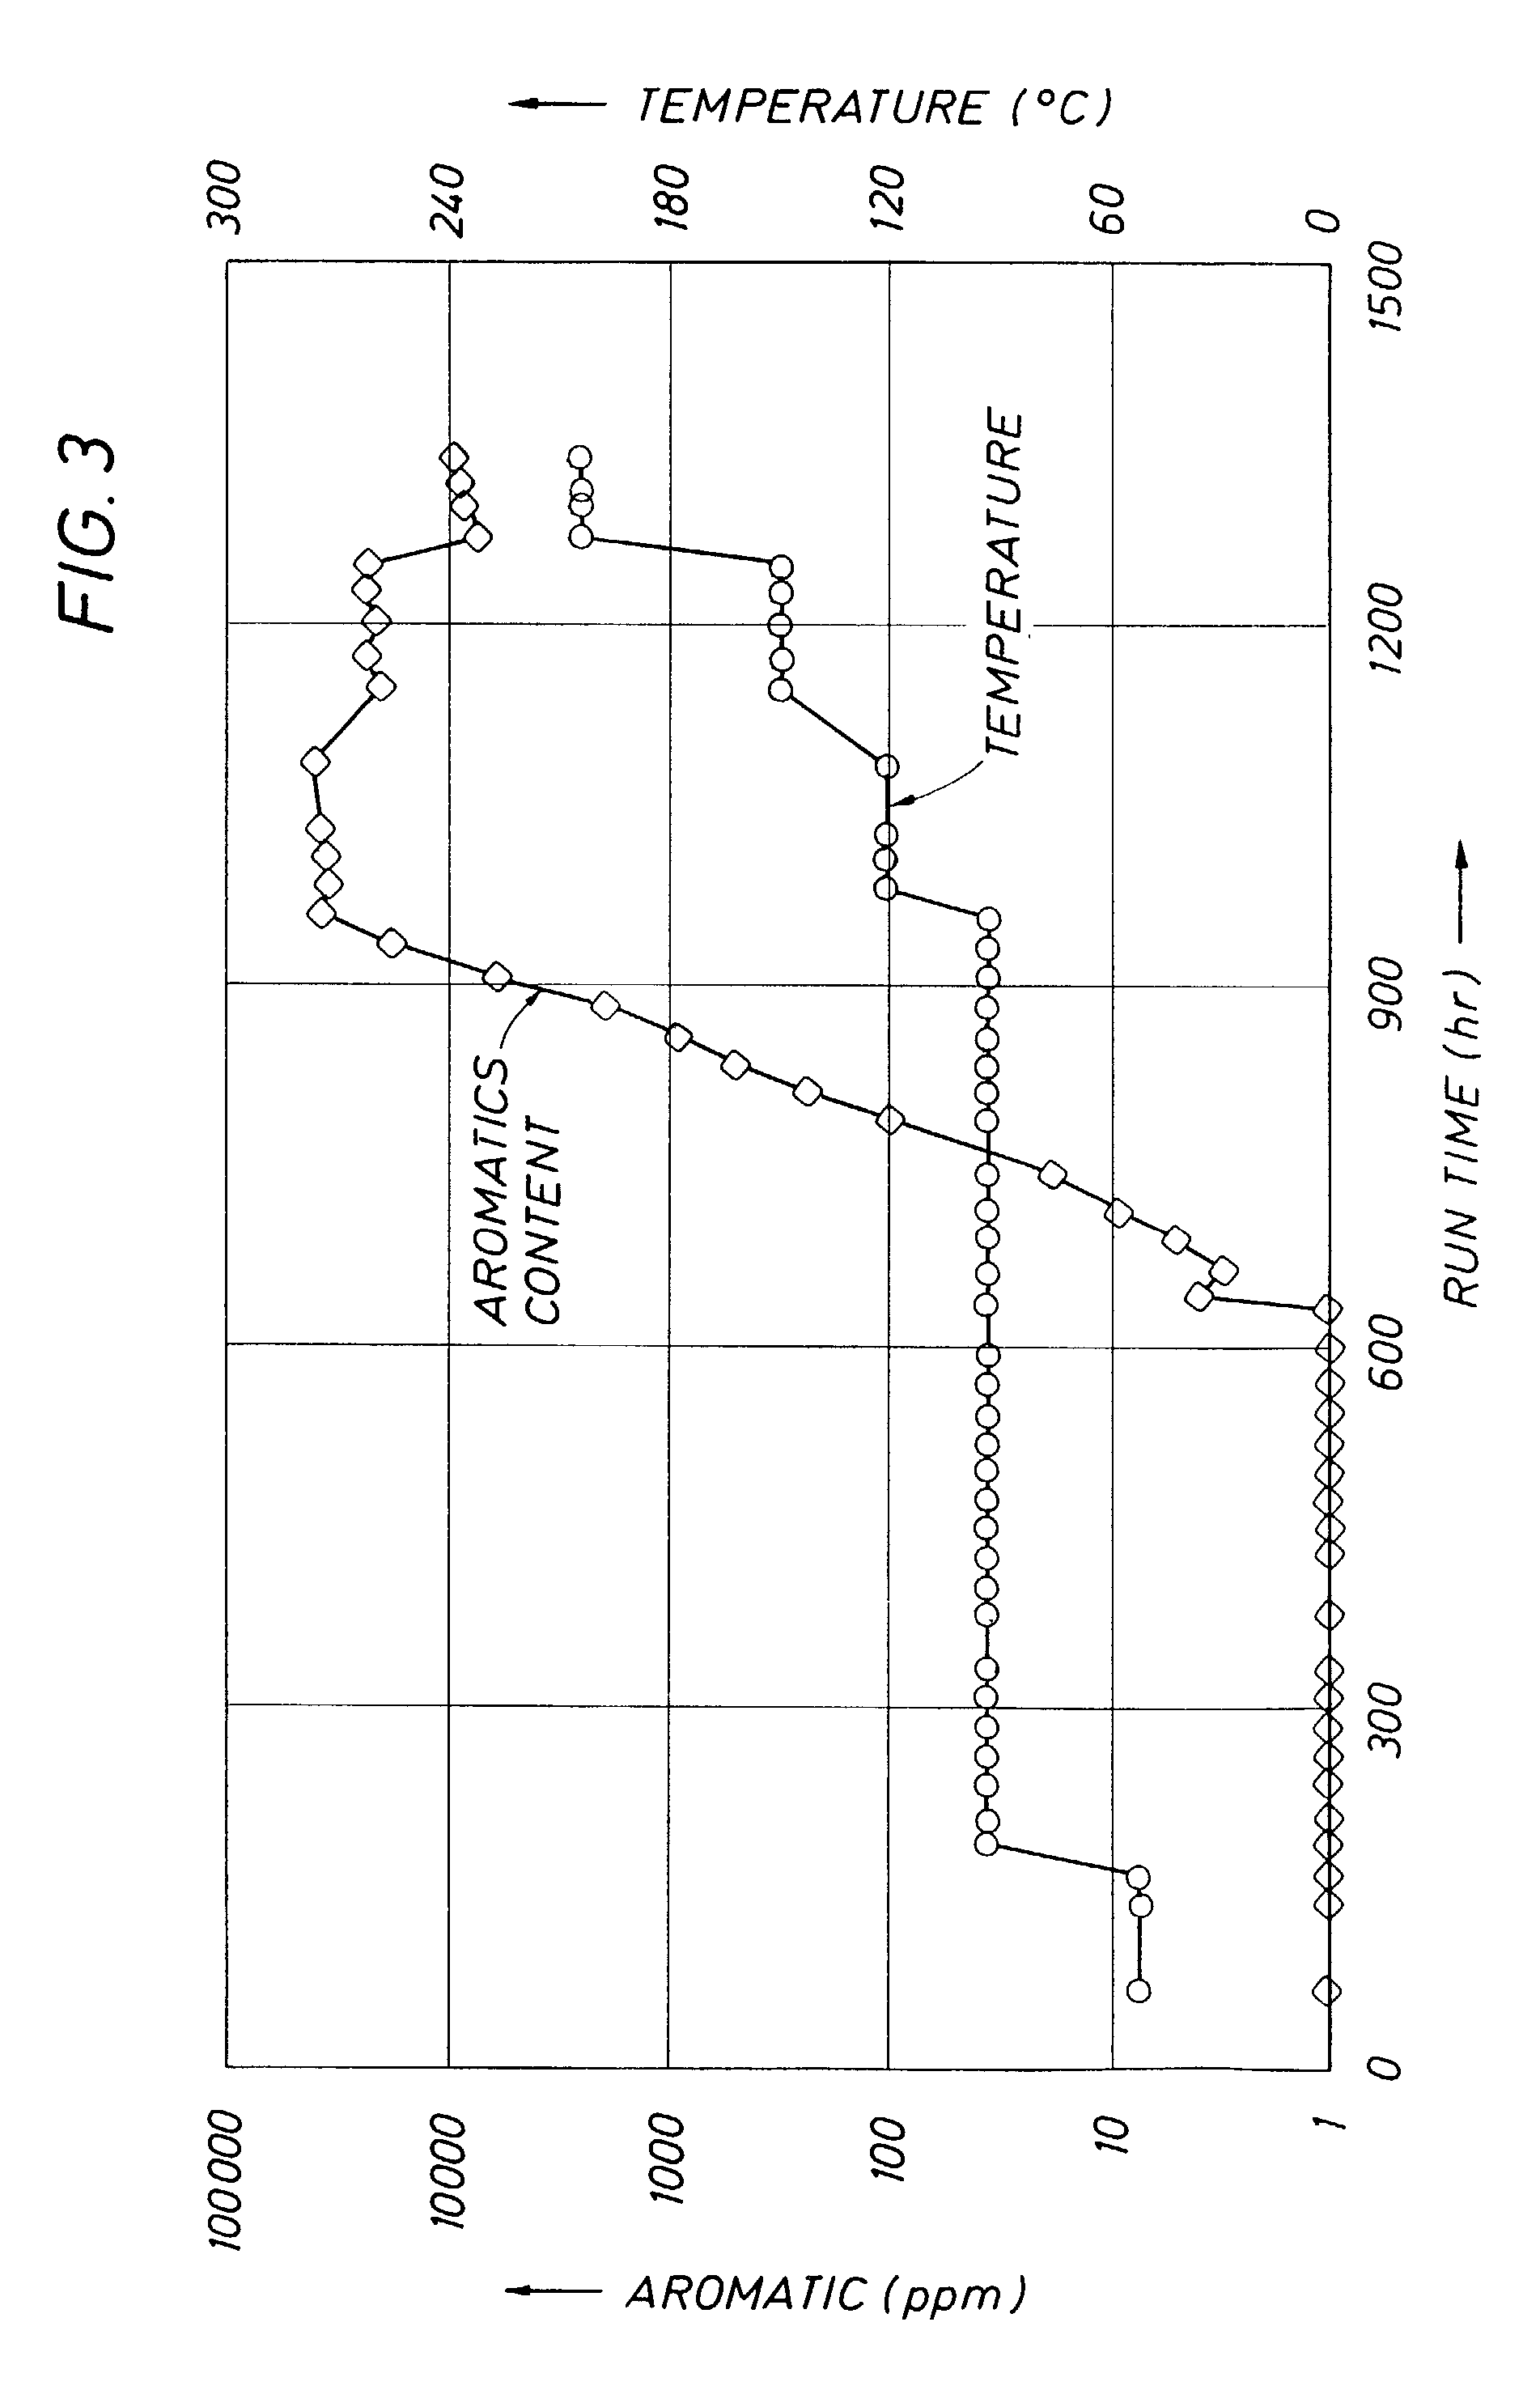 Process for hydrogenation of aromatics in hydrocarbon feedstocks containing thiopheneic compounds